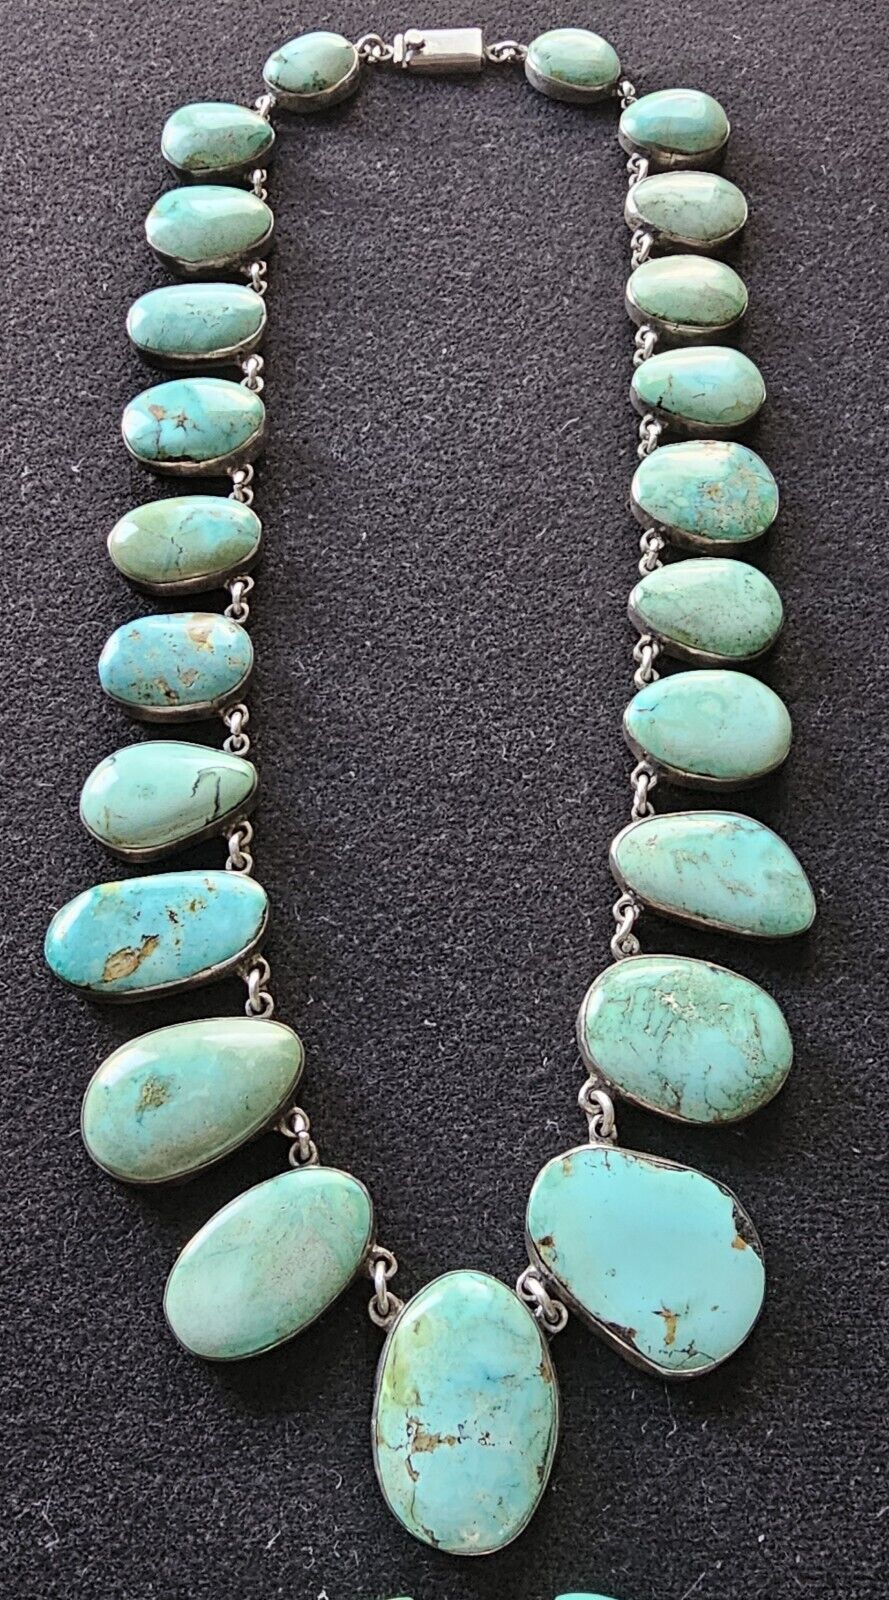 FEDERICO JIMENEZ SPECTACULAR STERLING SILVER TURQUOISE NECKLACE 151.3 GRAMS